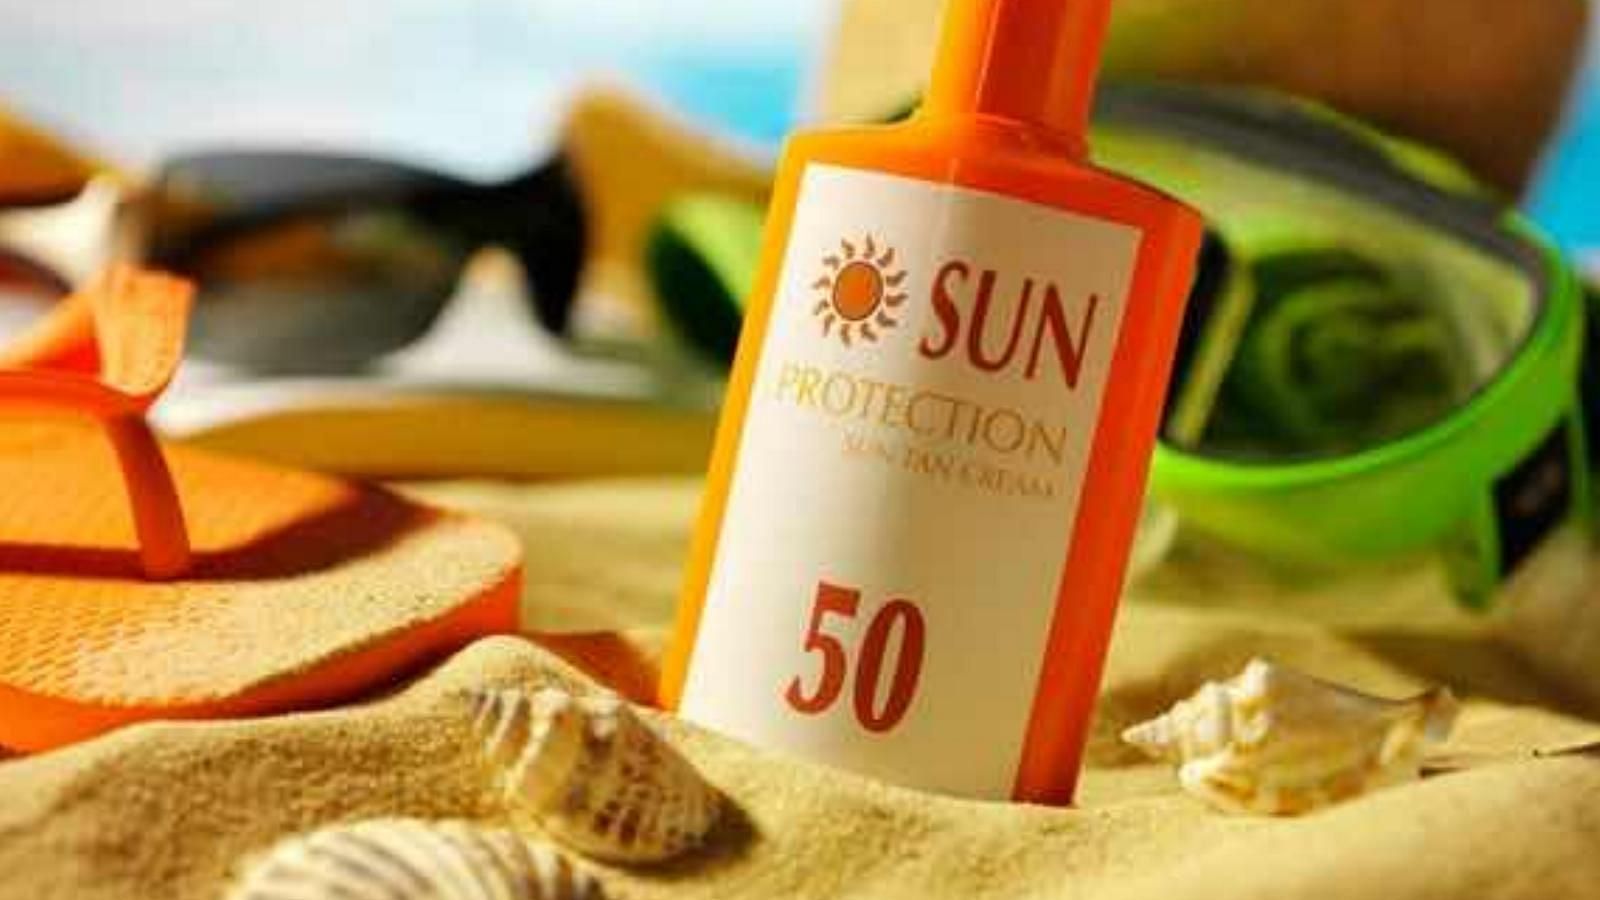 Concerns have been raised regarding zinc oxide in sunscreens and their retention in the skin.